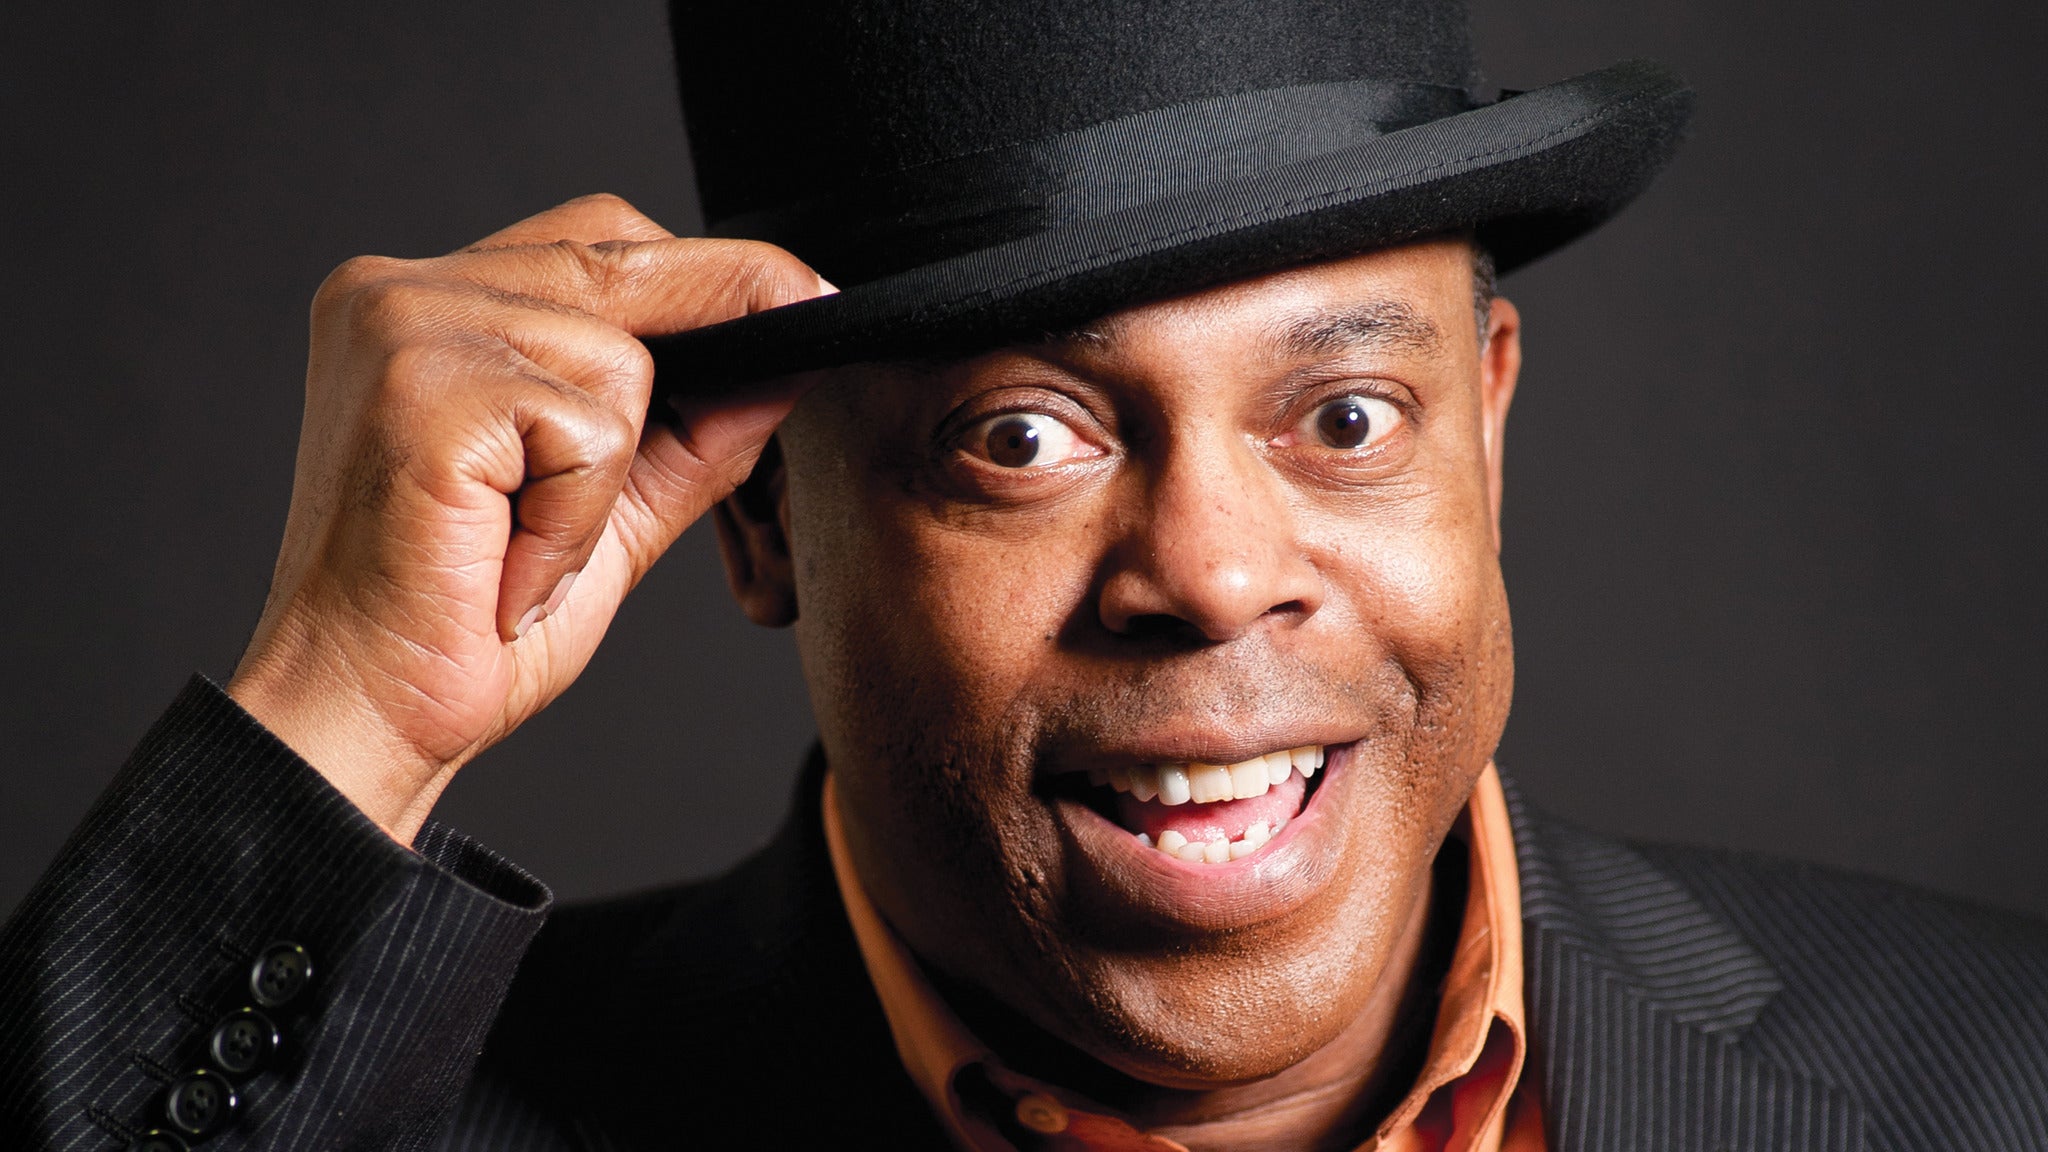 Michael Winslow & Friends in Waukegan promo photo for Genesee Theatre presale offer code